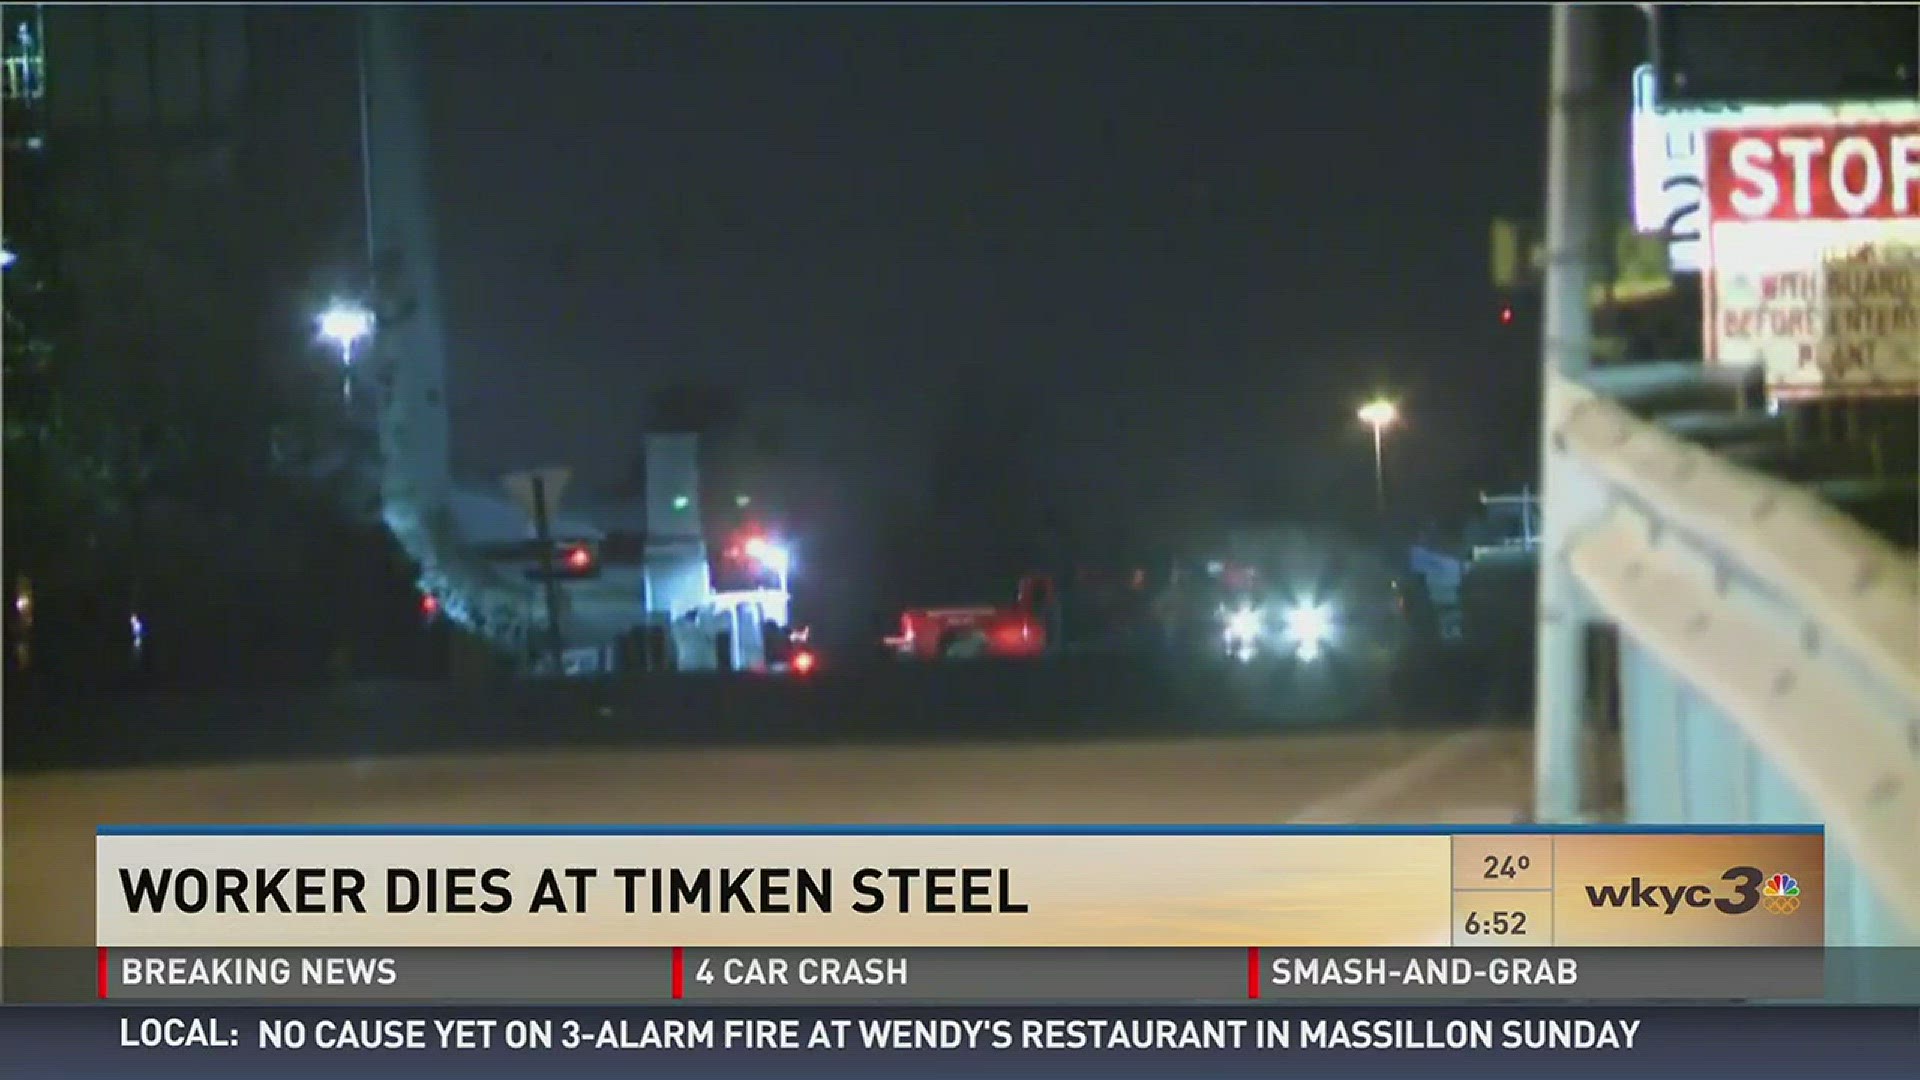 March 21, 2016: After a man was killed in a TimkenSteel incident Sunday, here's a look back at some of the other safety issues reported in the company in recent years.